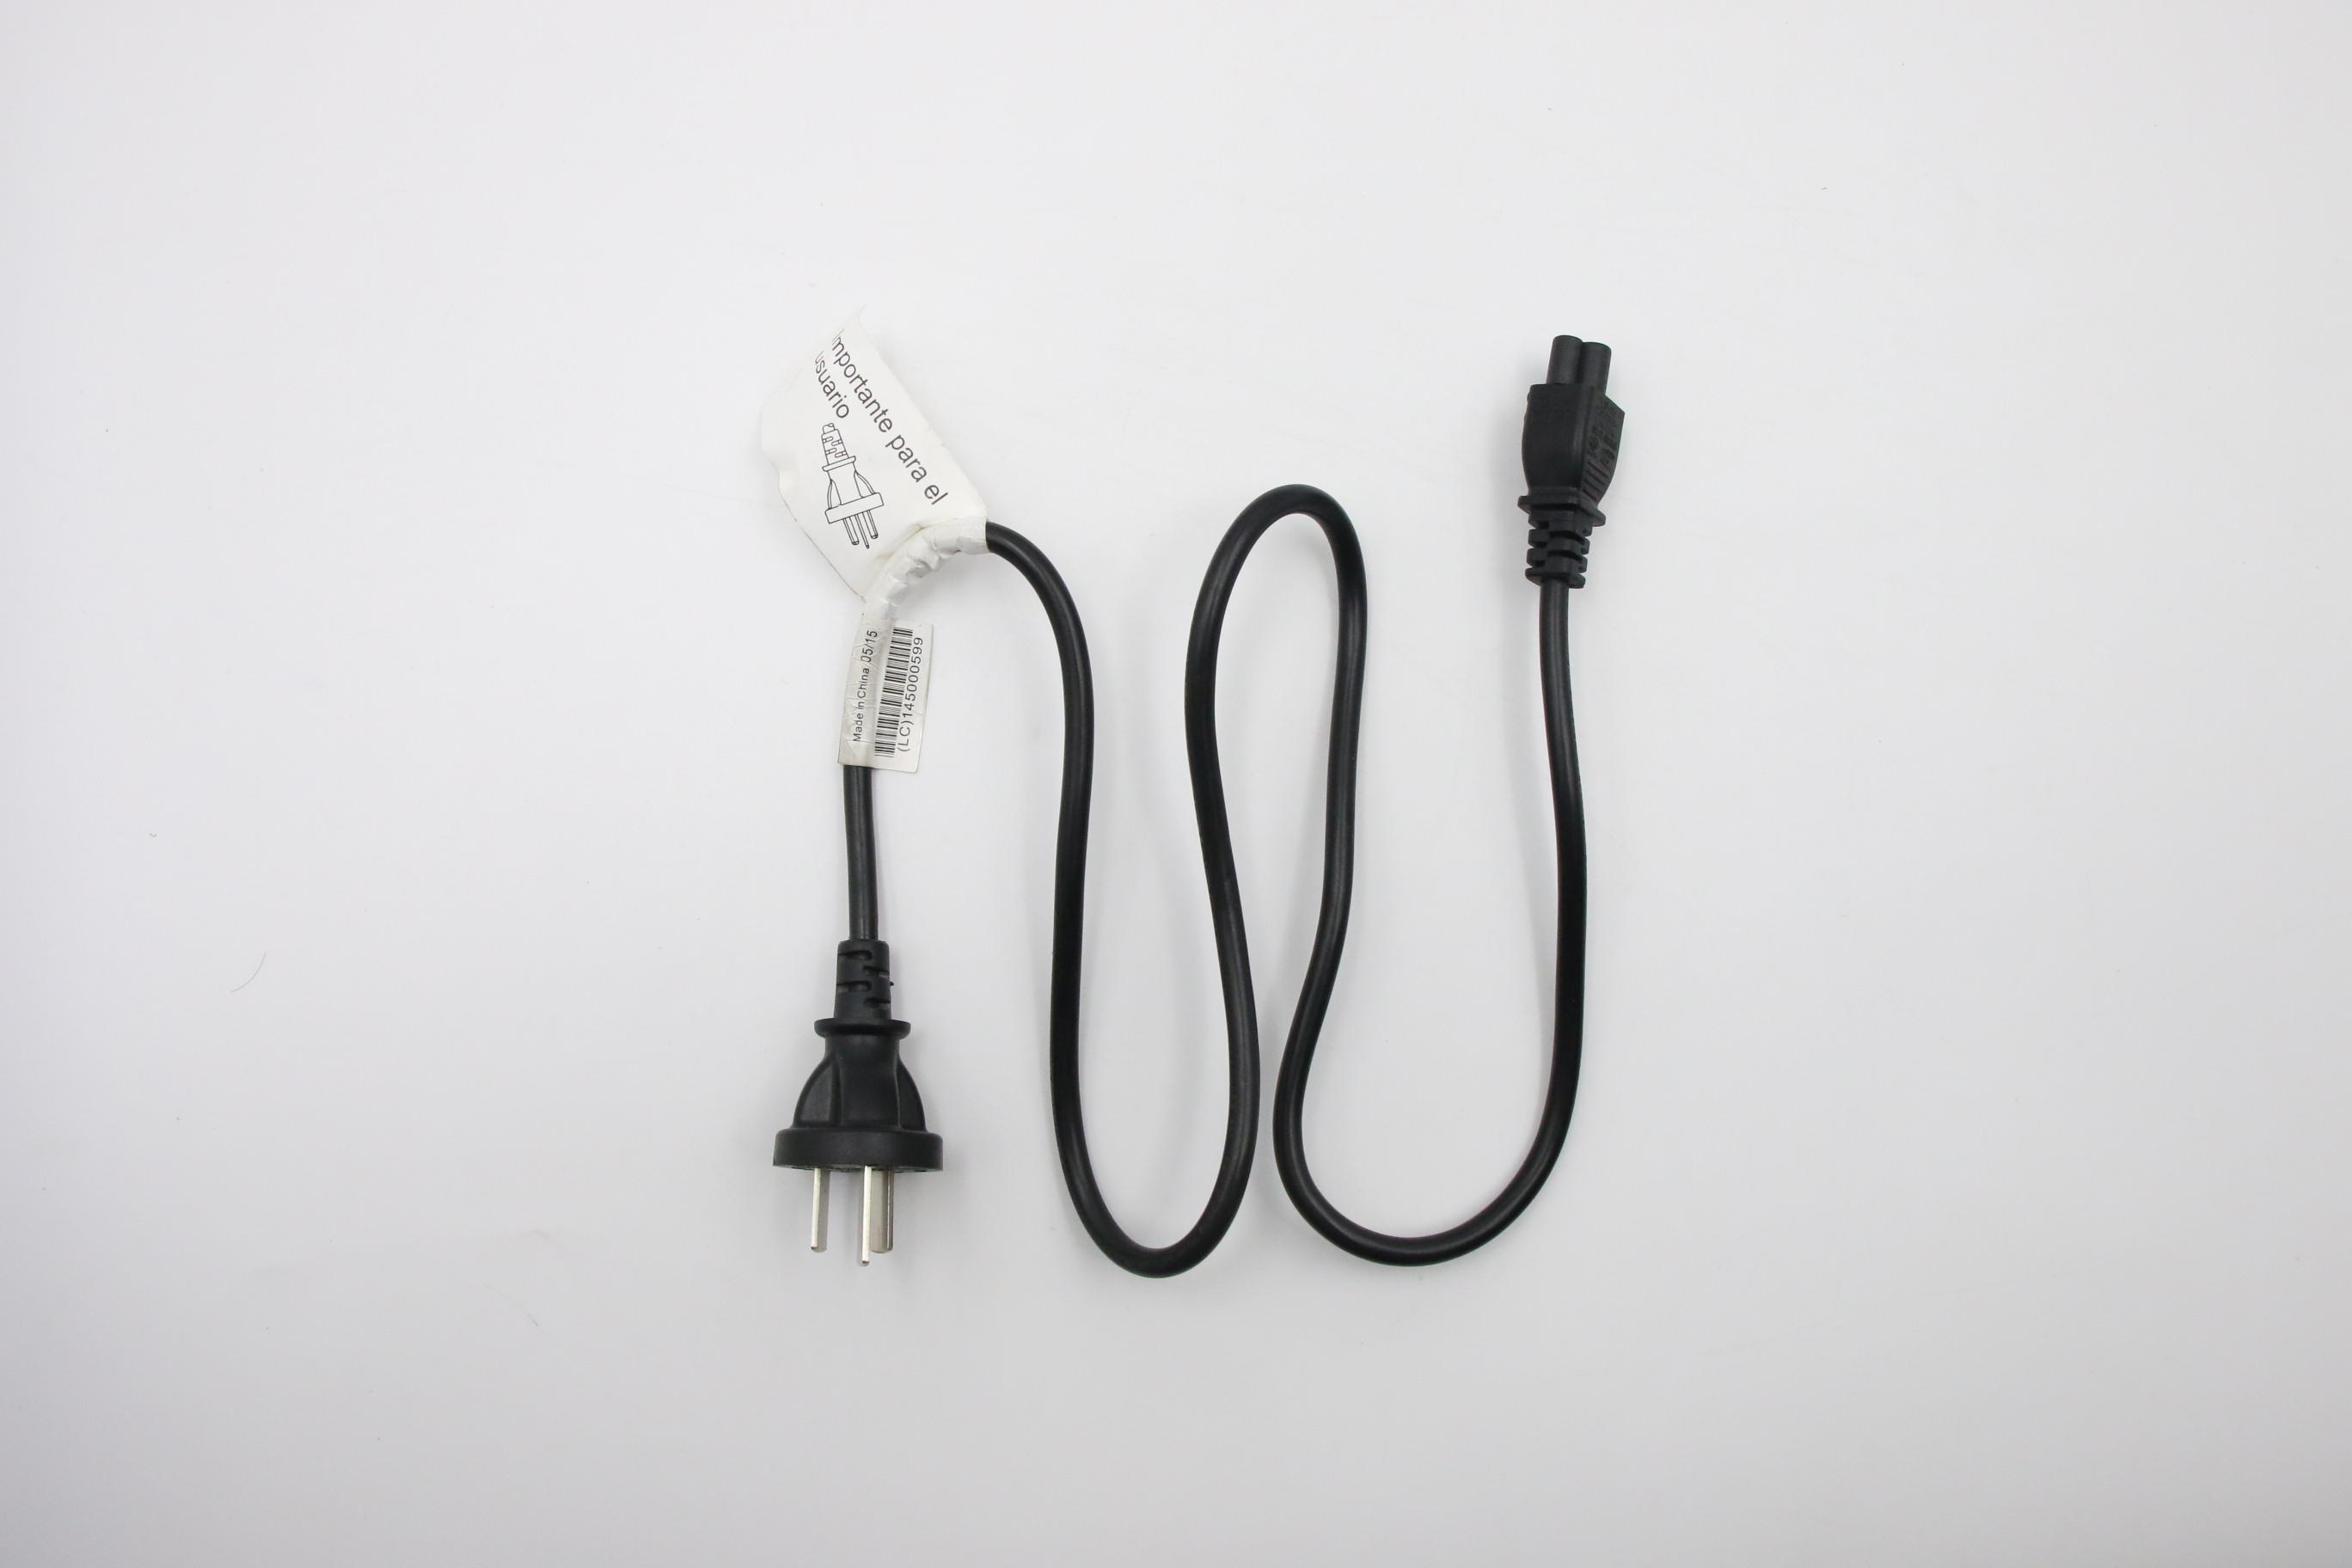 Lenovo IdeaPad Y700 Touch-15ISK Laptop Cable, external or CRU-able internal - 145000599